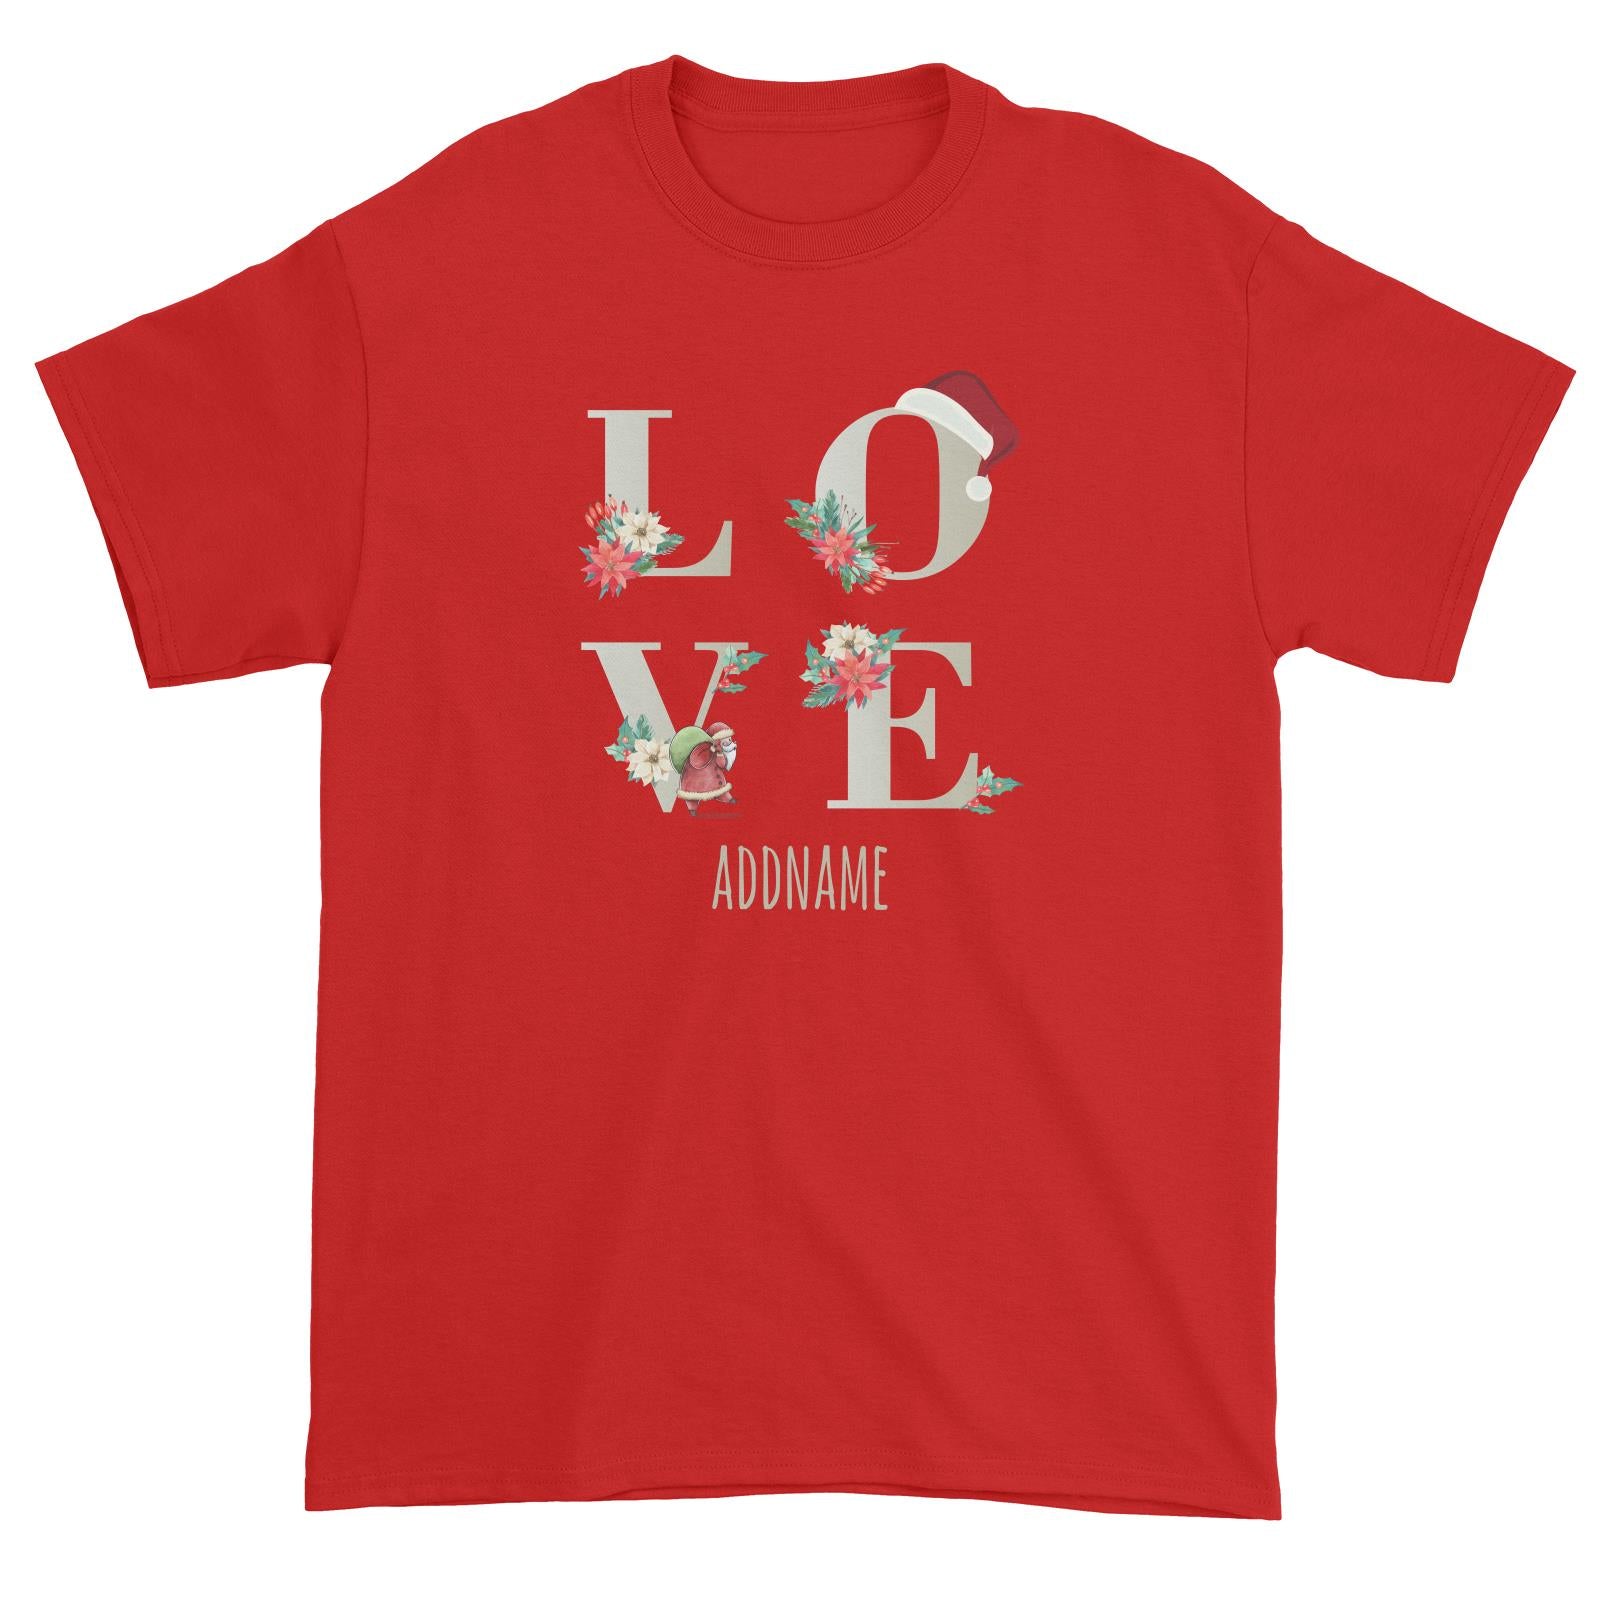 LOVE with Christmas Elements Addname Unisex T-Shirt  Matching Family Personalizable Designs